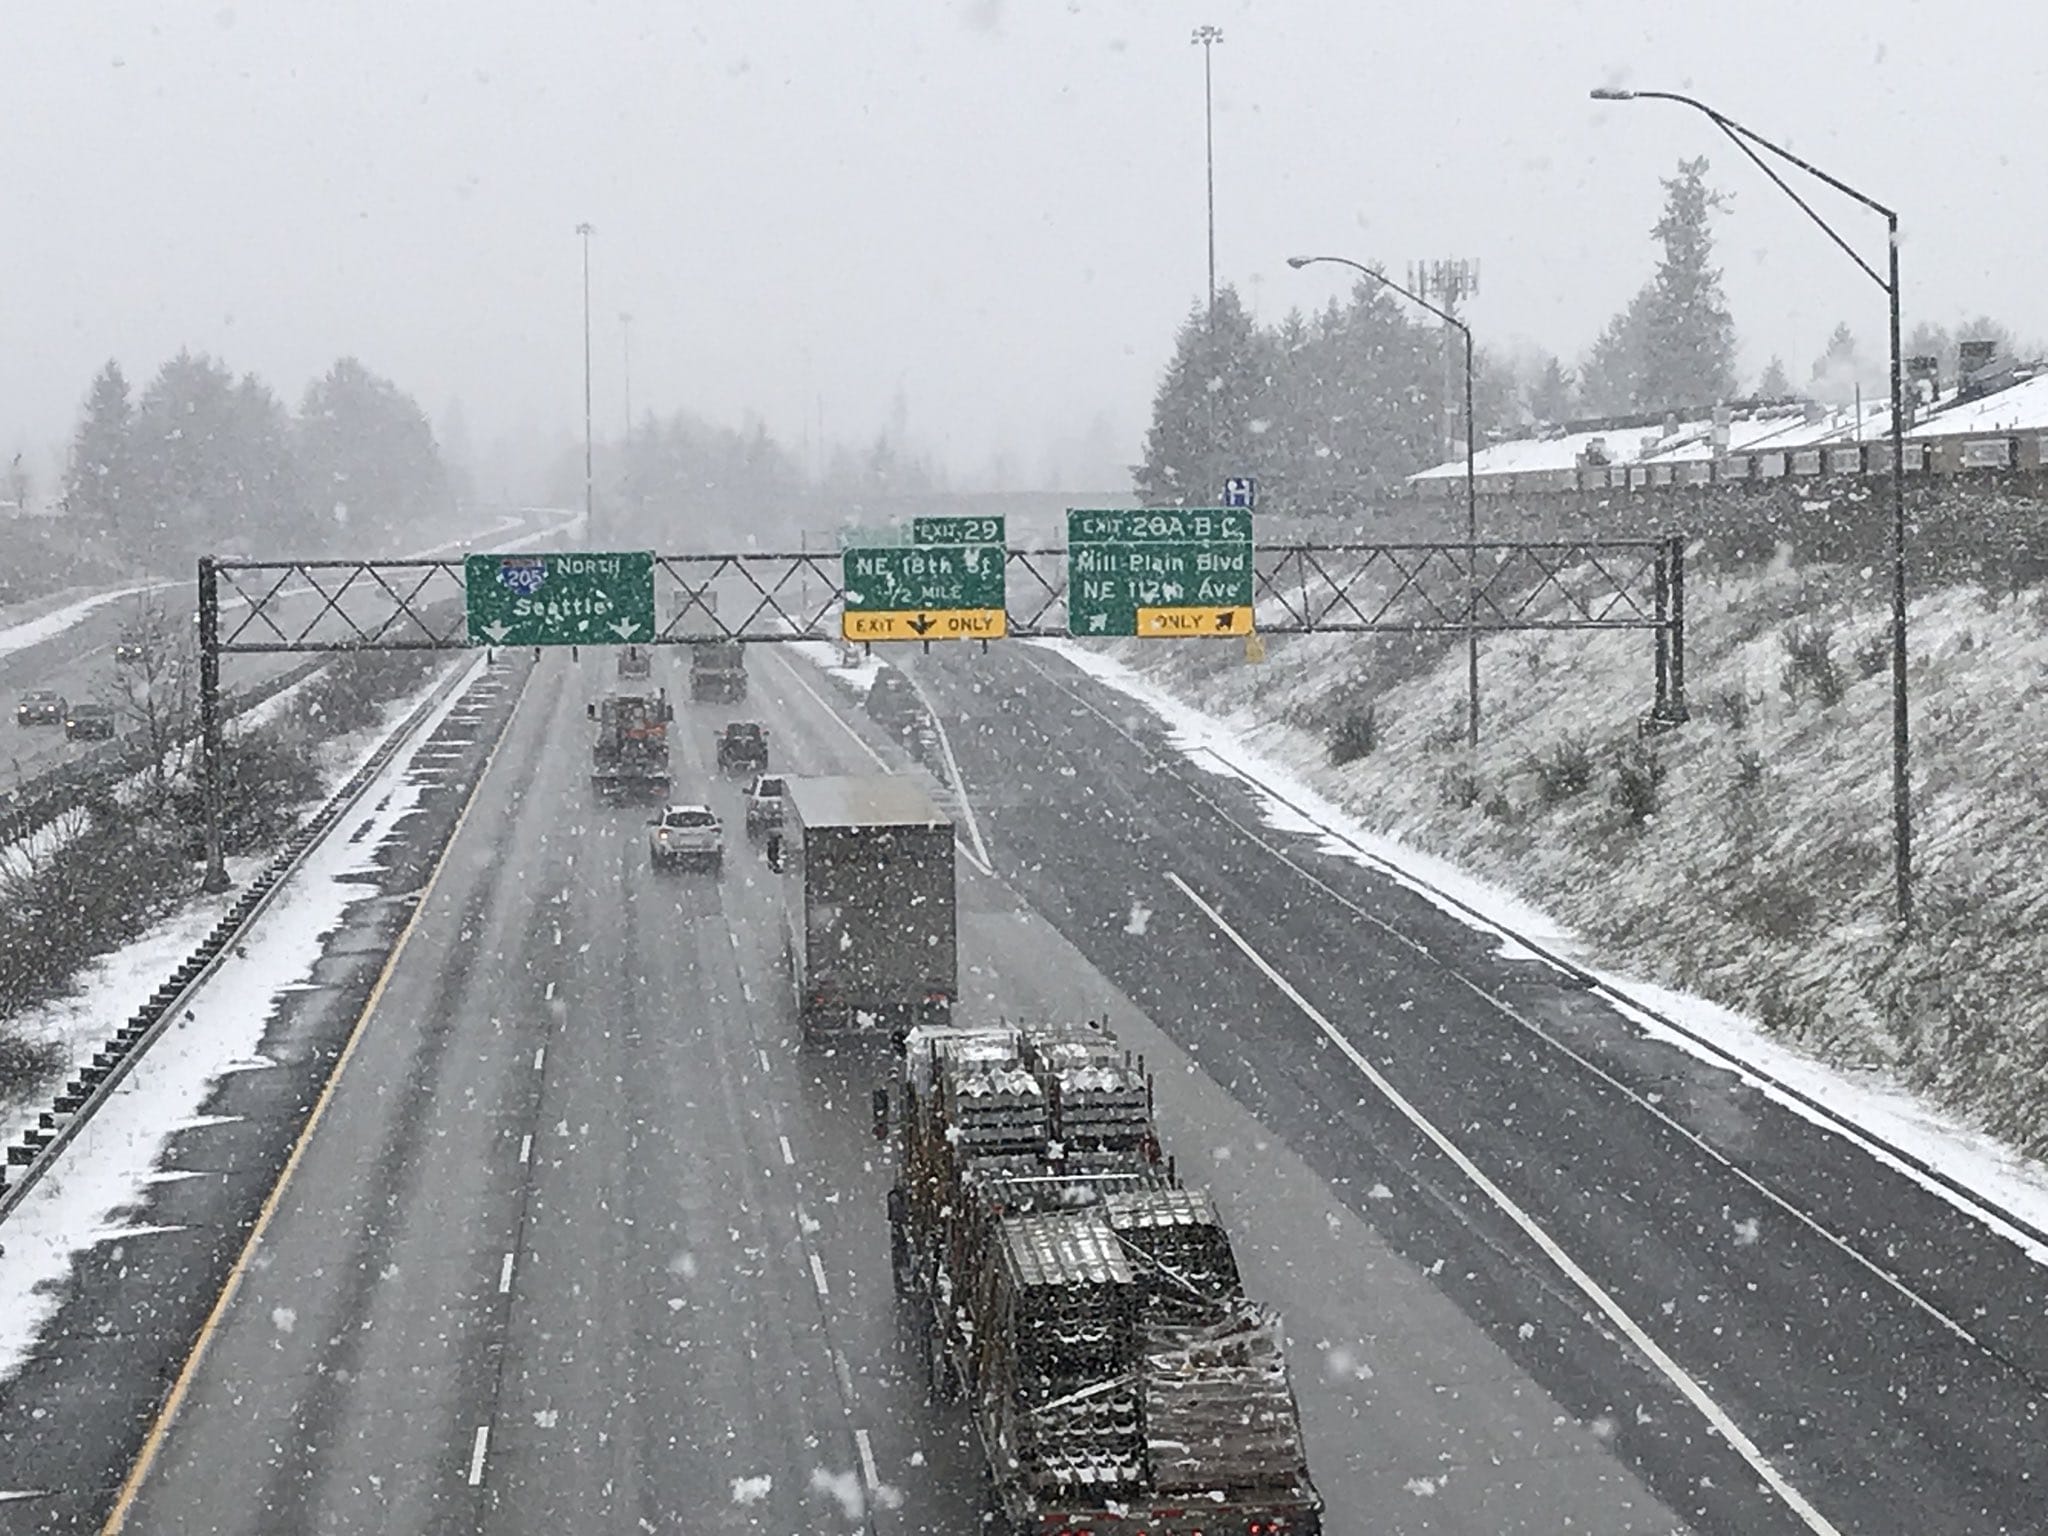 Traffic flows smoothly on Interstate 205 near Mill Plain Boulevard despite the snow on Tuesday morning.